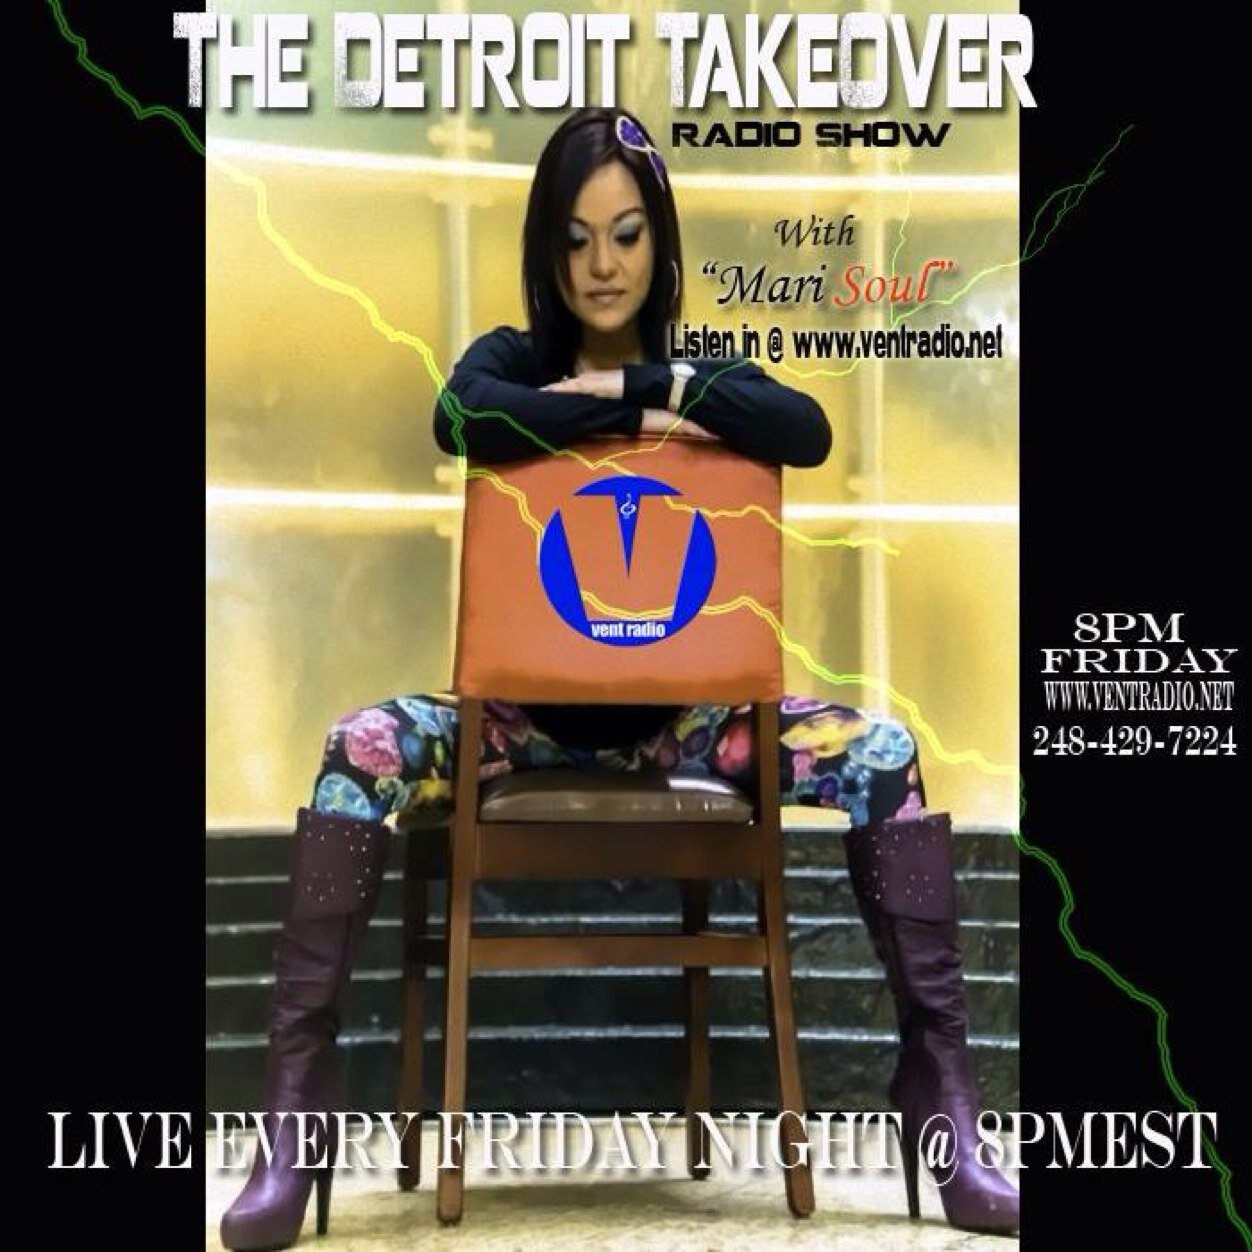 The Detroit TakeOver is an internet radio show featuring Detroit's Hottest Artist hosted by Mari Soul
Subit your music to:
TheDetroitTakeOver@gmail.com